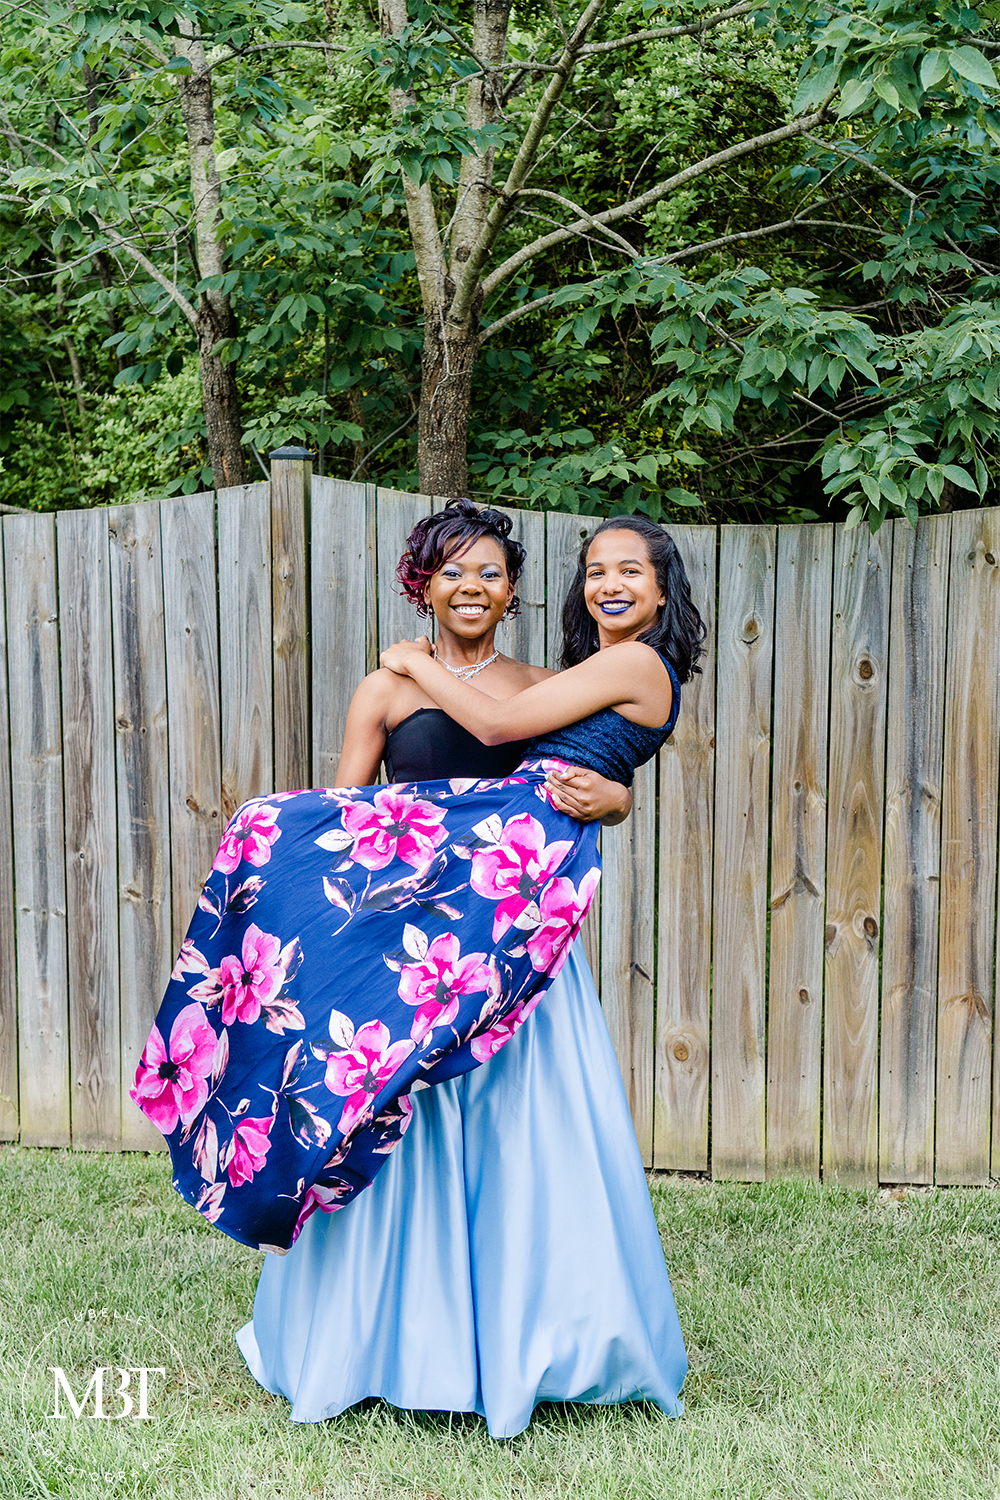 best friends prom session - one is carrying the other taken at a backyard in Fairfax, Virginia taken by a Northern Virginia portrait photographer